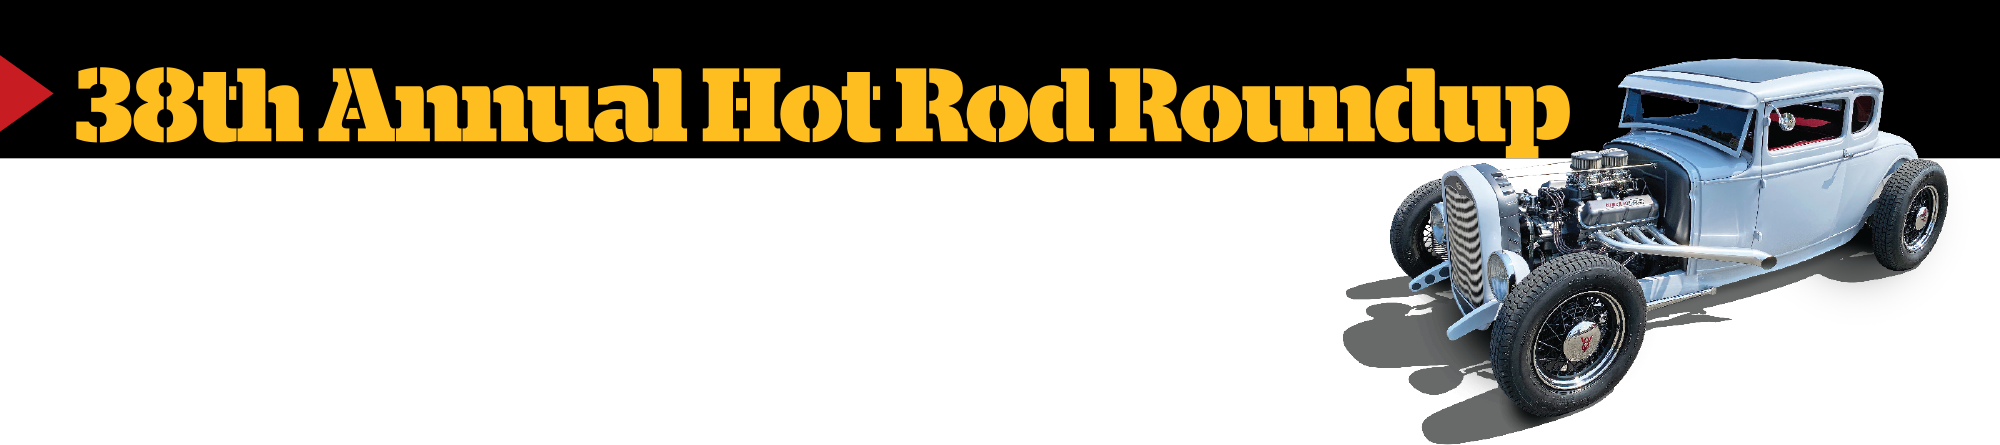 38th Annual Hot Rod Roundup